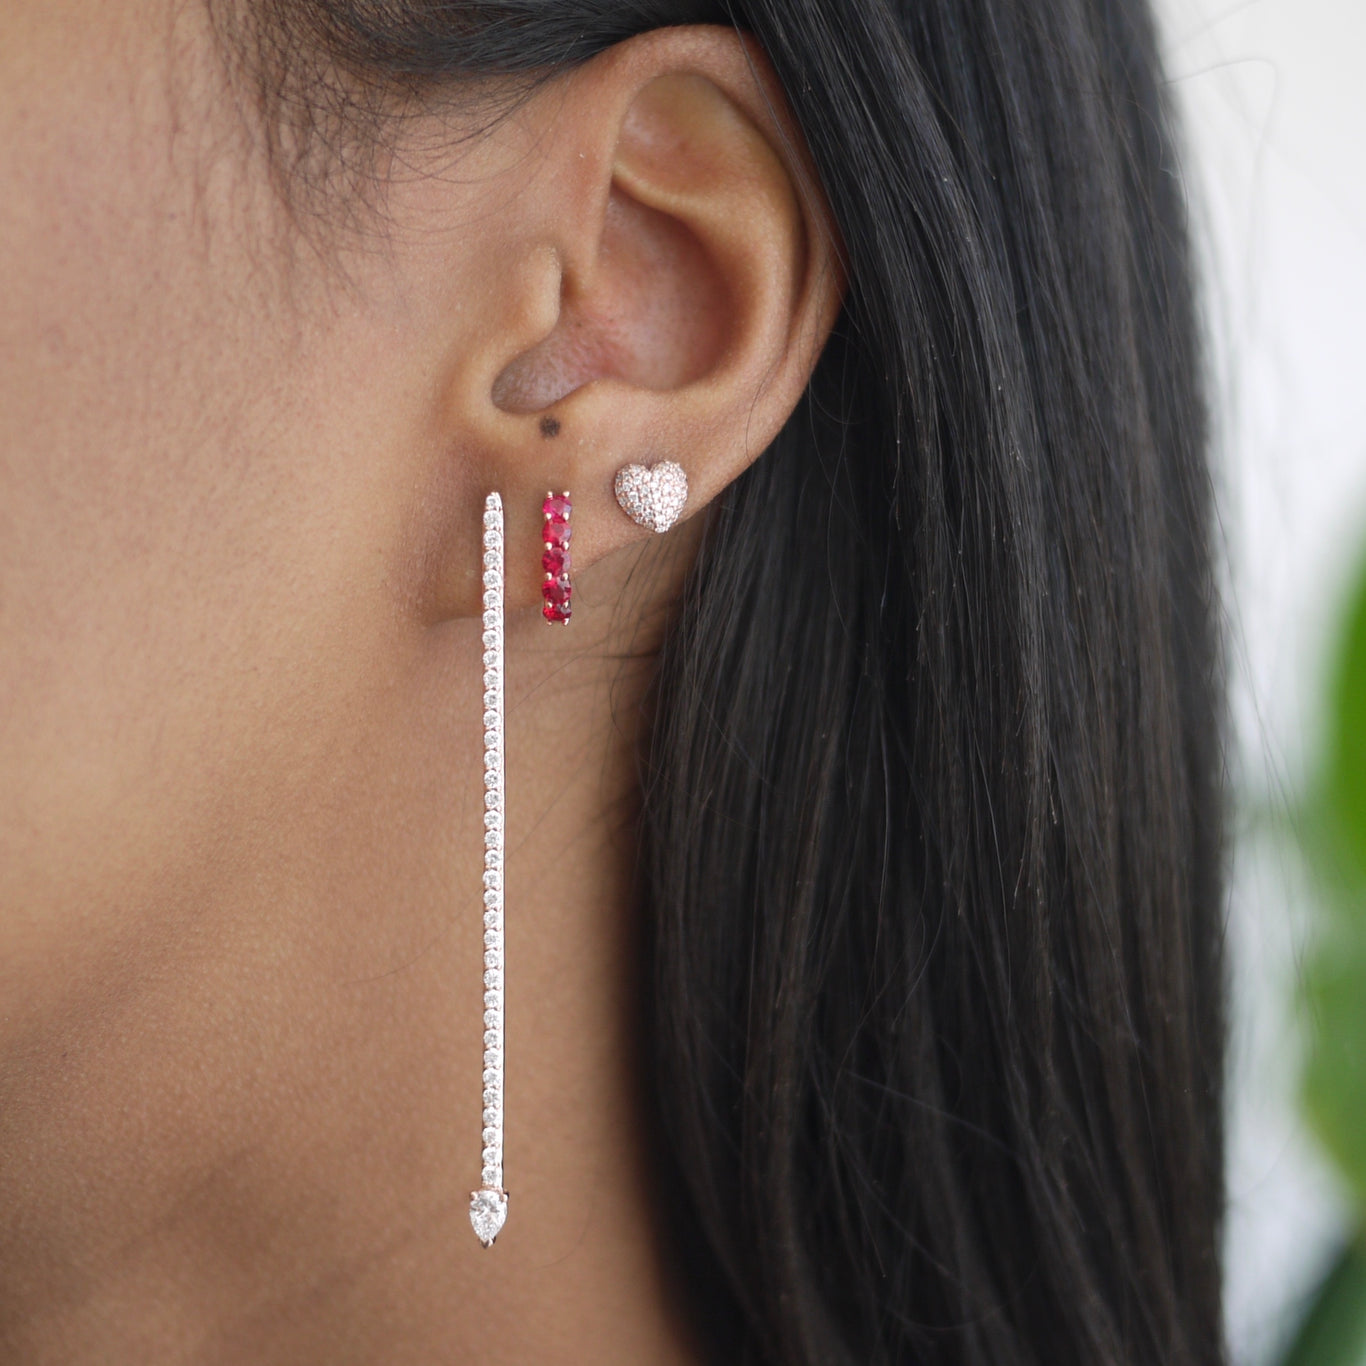 Ruby Sparkler Huggie shown with the Millo Earring and Diamond Heart Stud.